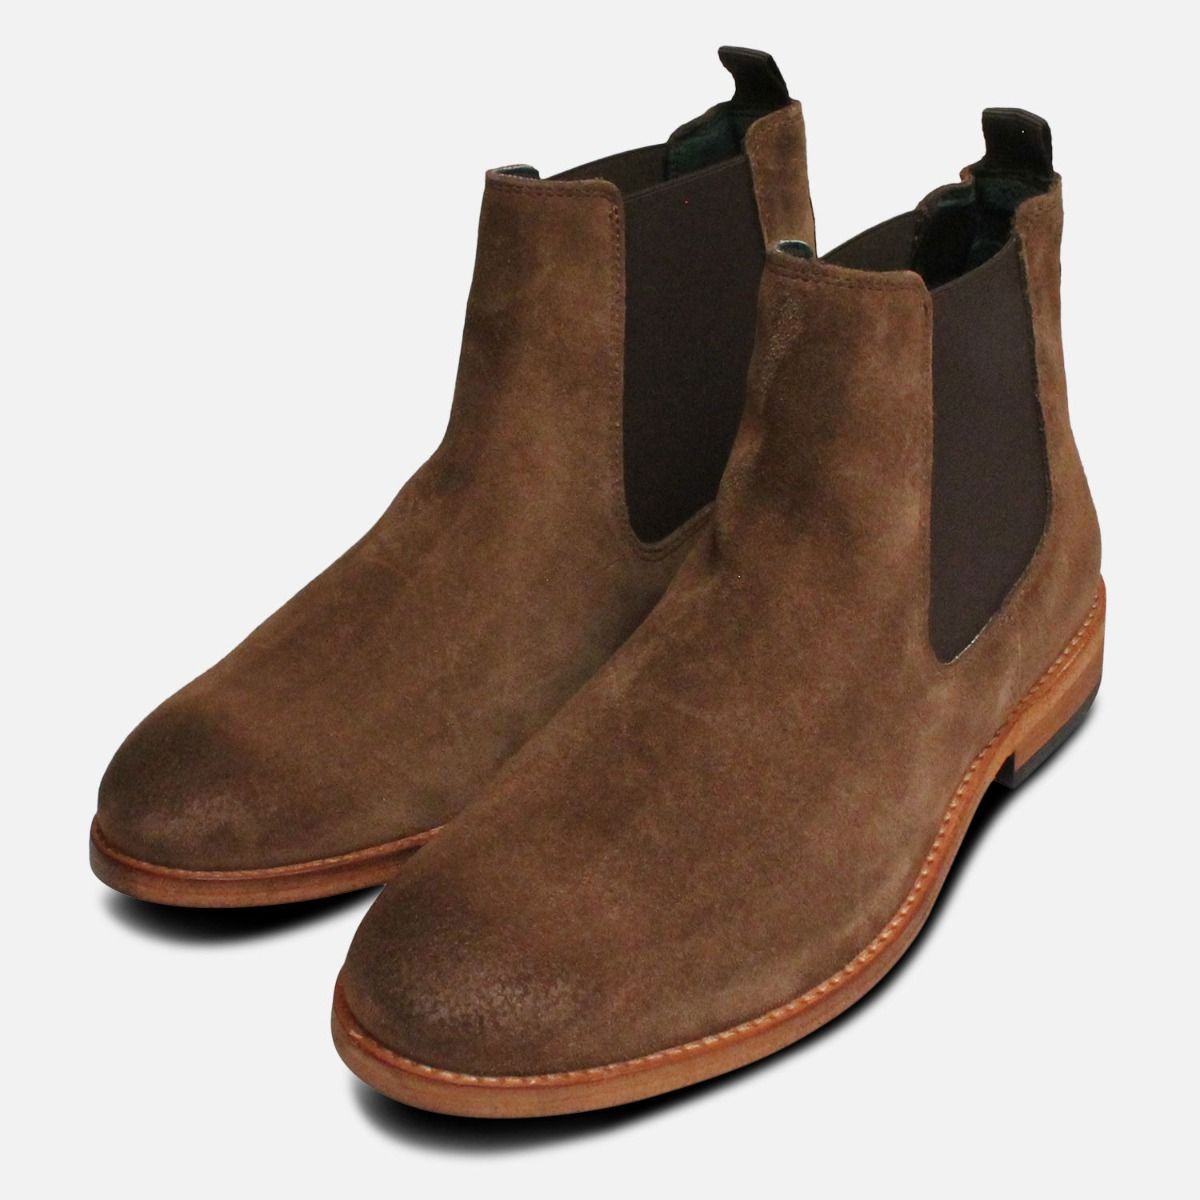 tobacco suede chelsea boots